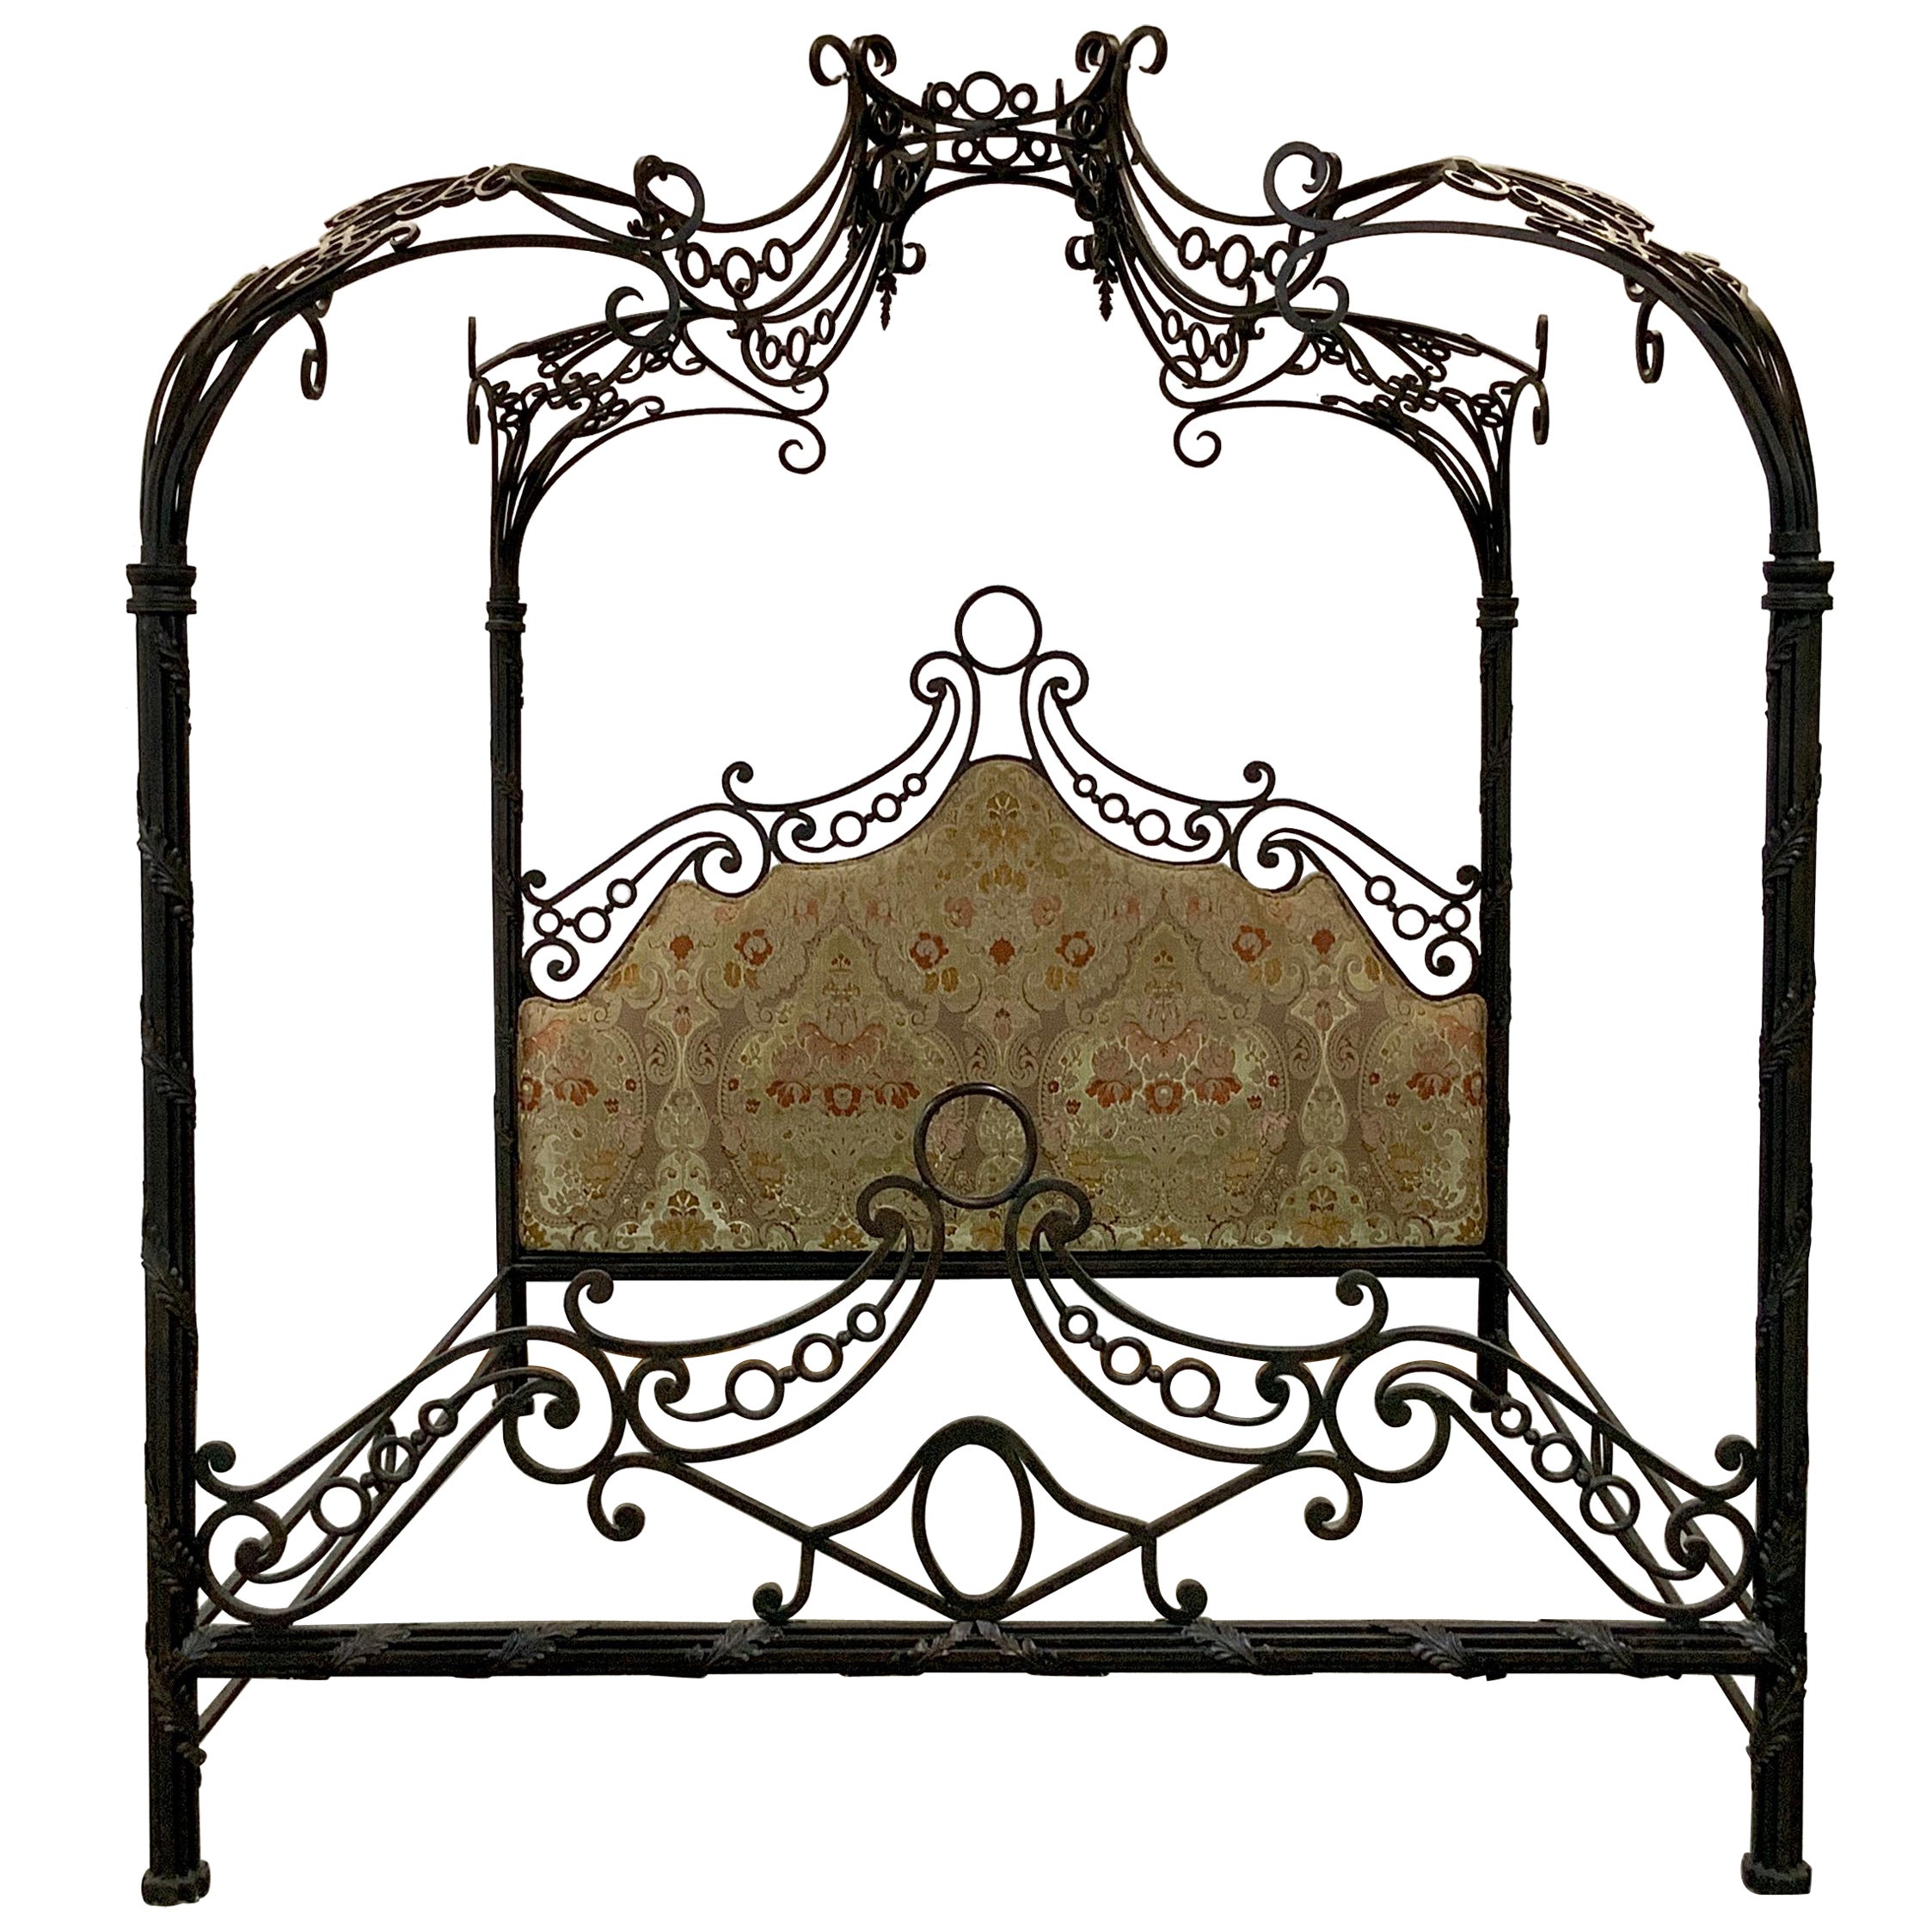 Incredible Phyllis Morris Custom Wrought Iron Canopy Bed XL King For Sale